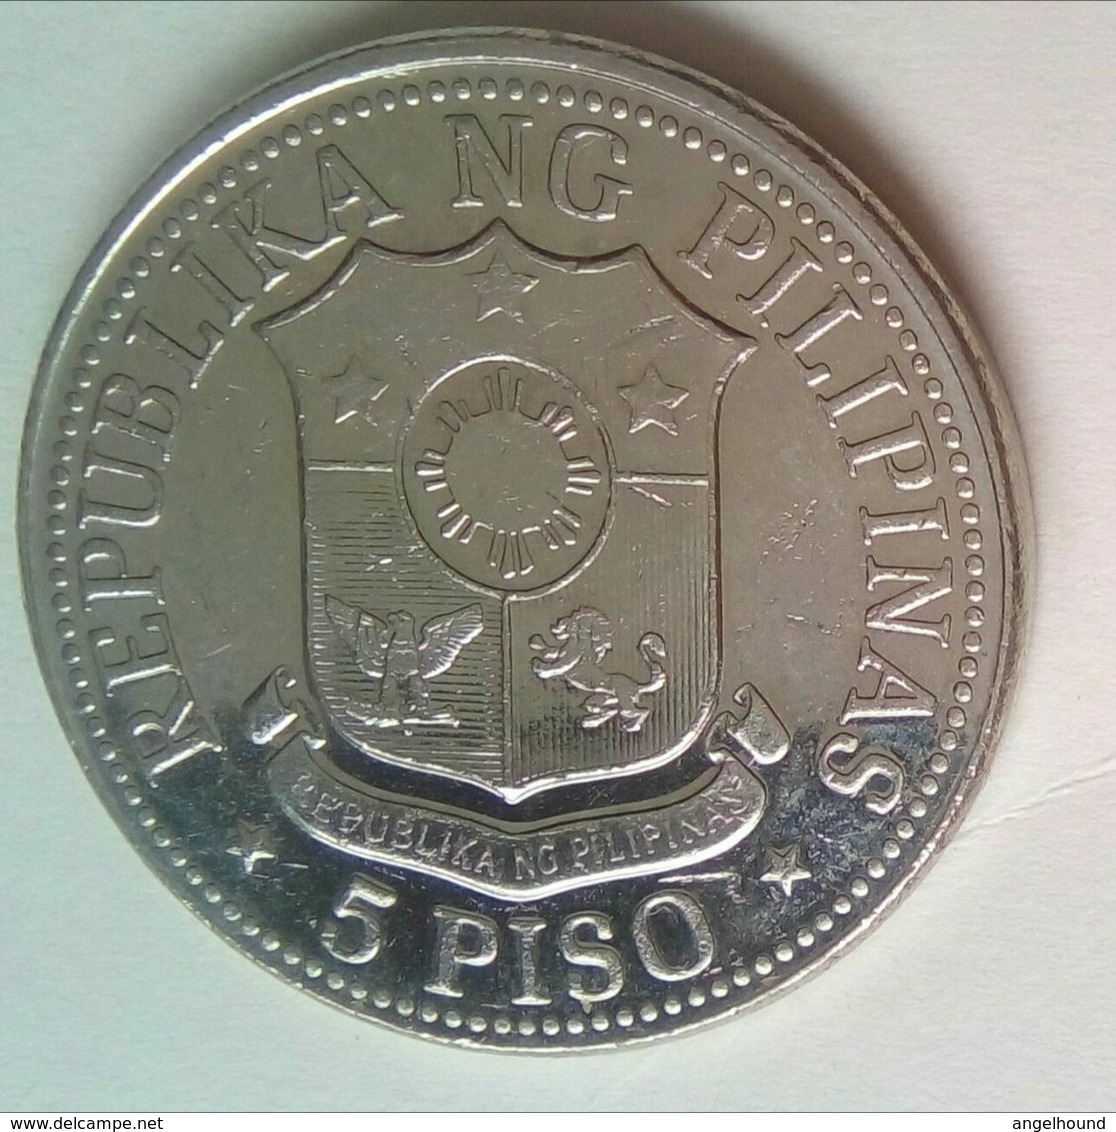 Philippines Marcos 5 Peso Coin 1982 - Philippines